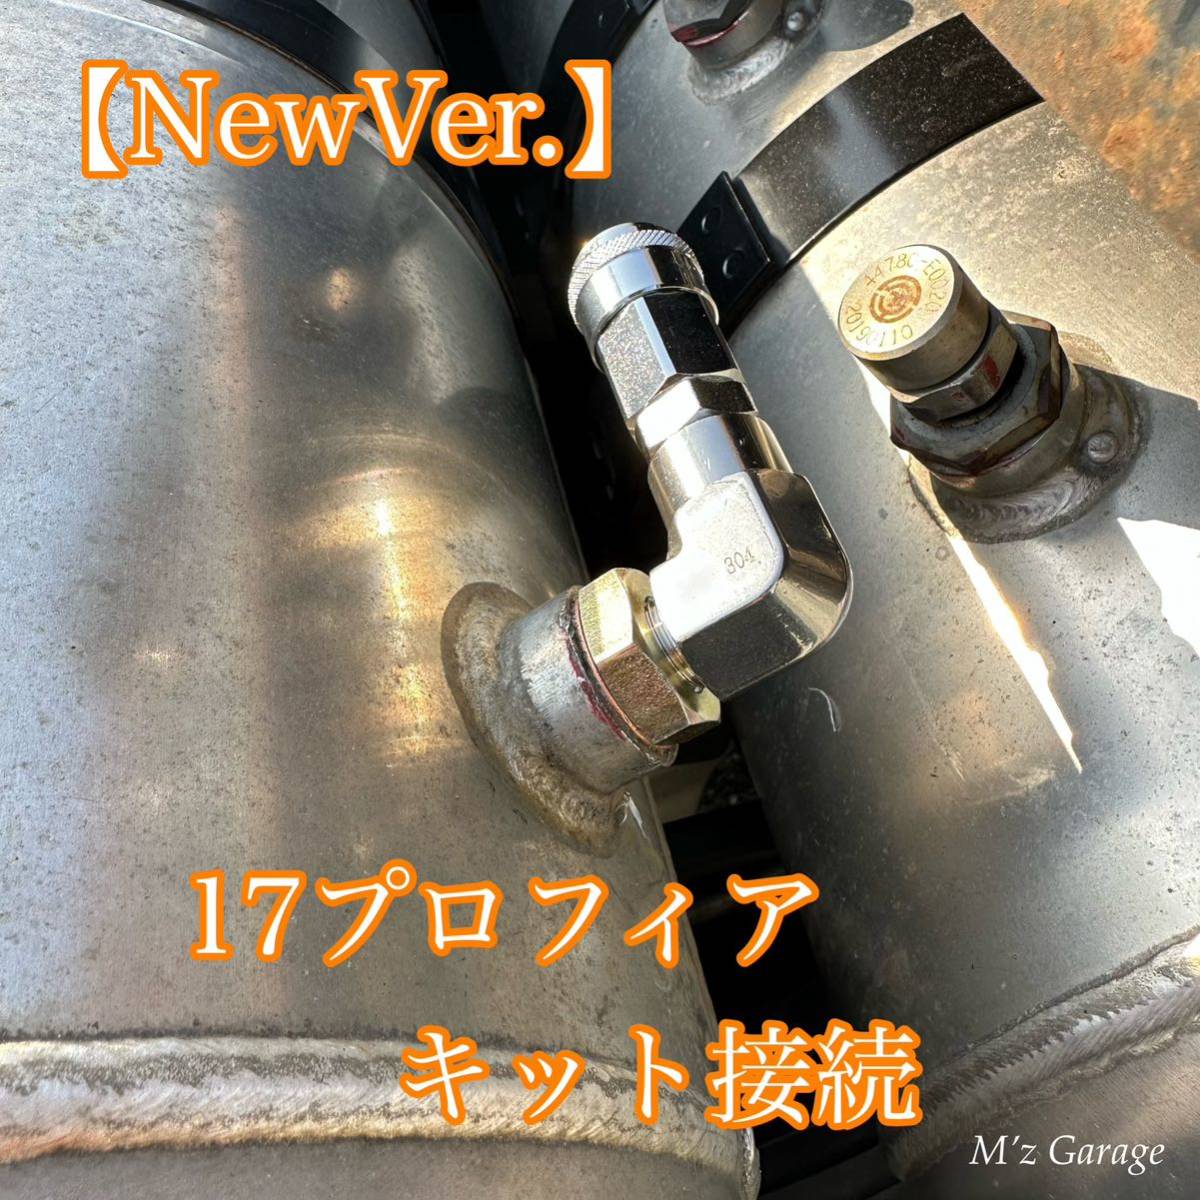 [NewVer]17 Profia air take out kit SUS304 made of stainless steel * super height pressure elbow * bushing screw attaching 